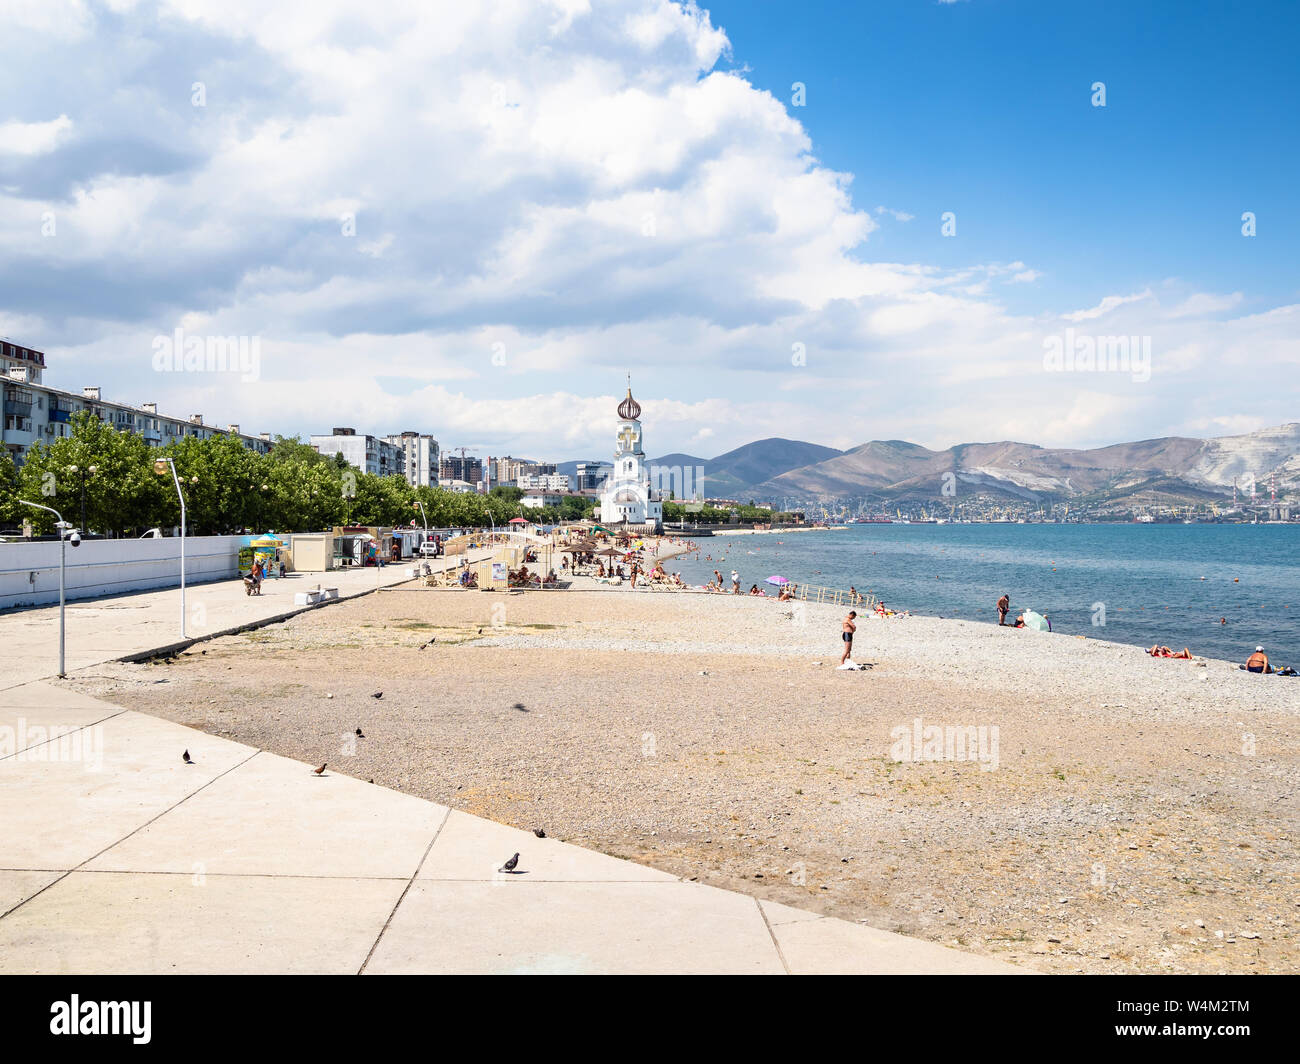 NOVOROSSIYSK, RUSSIA - JULY 7, 2019: tourists on city beach near Chapel of St Nicholas the Wonderworker and Church of St Peter and St Fevronia on Admi Stock Photo